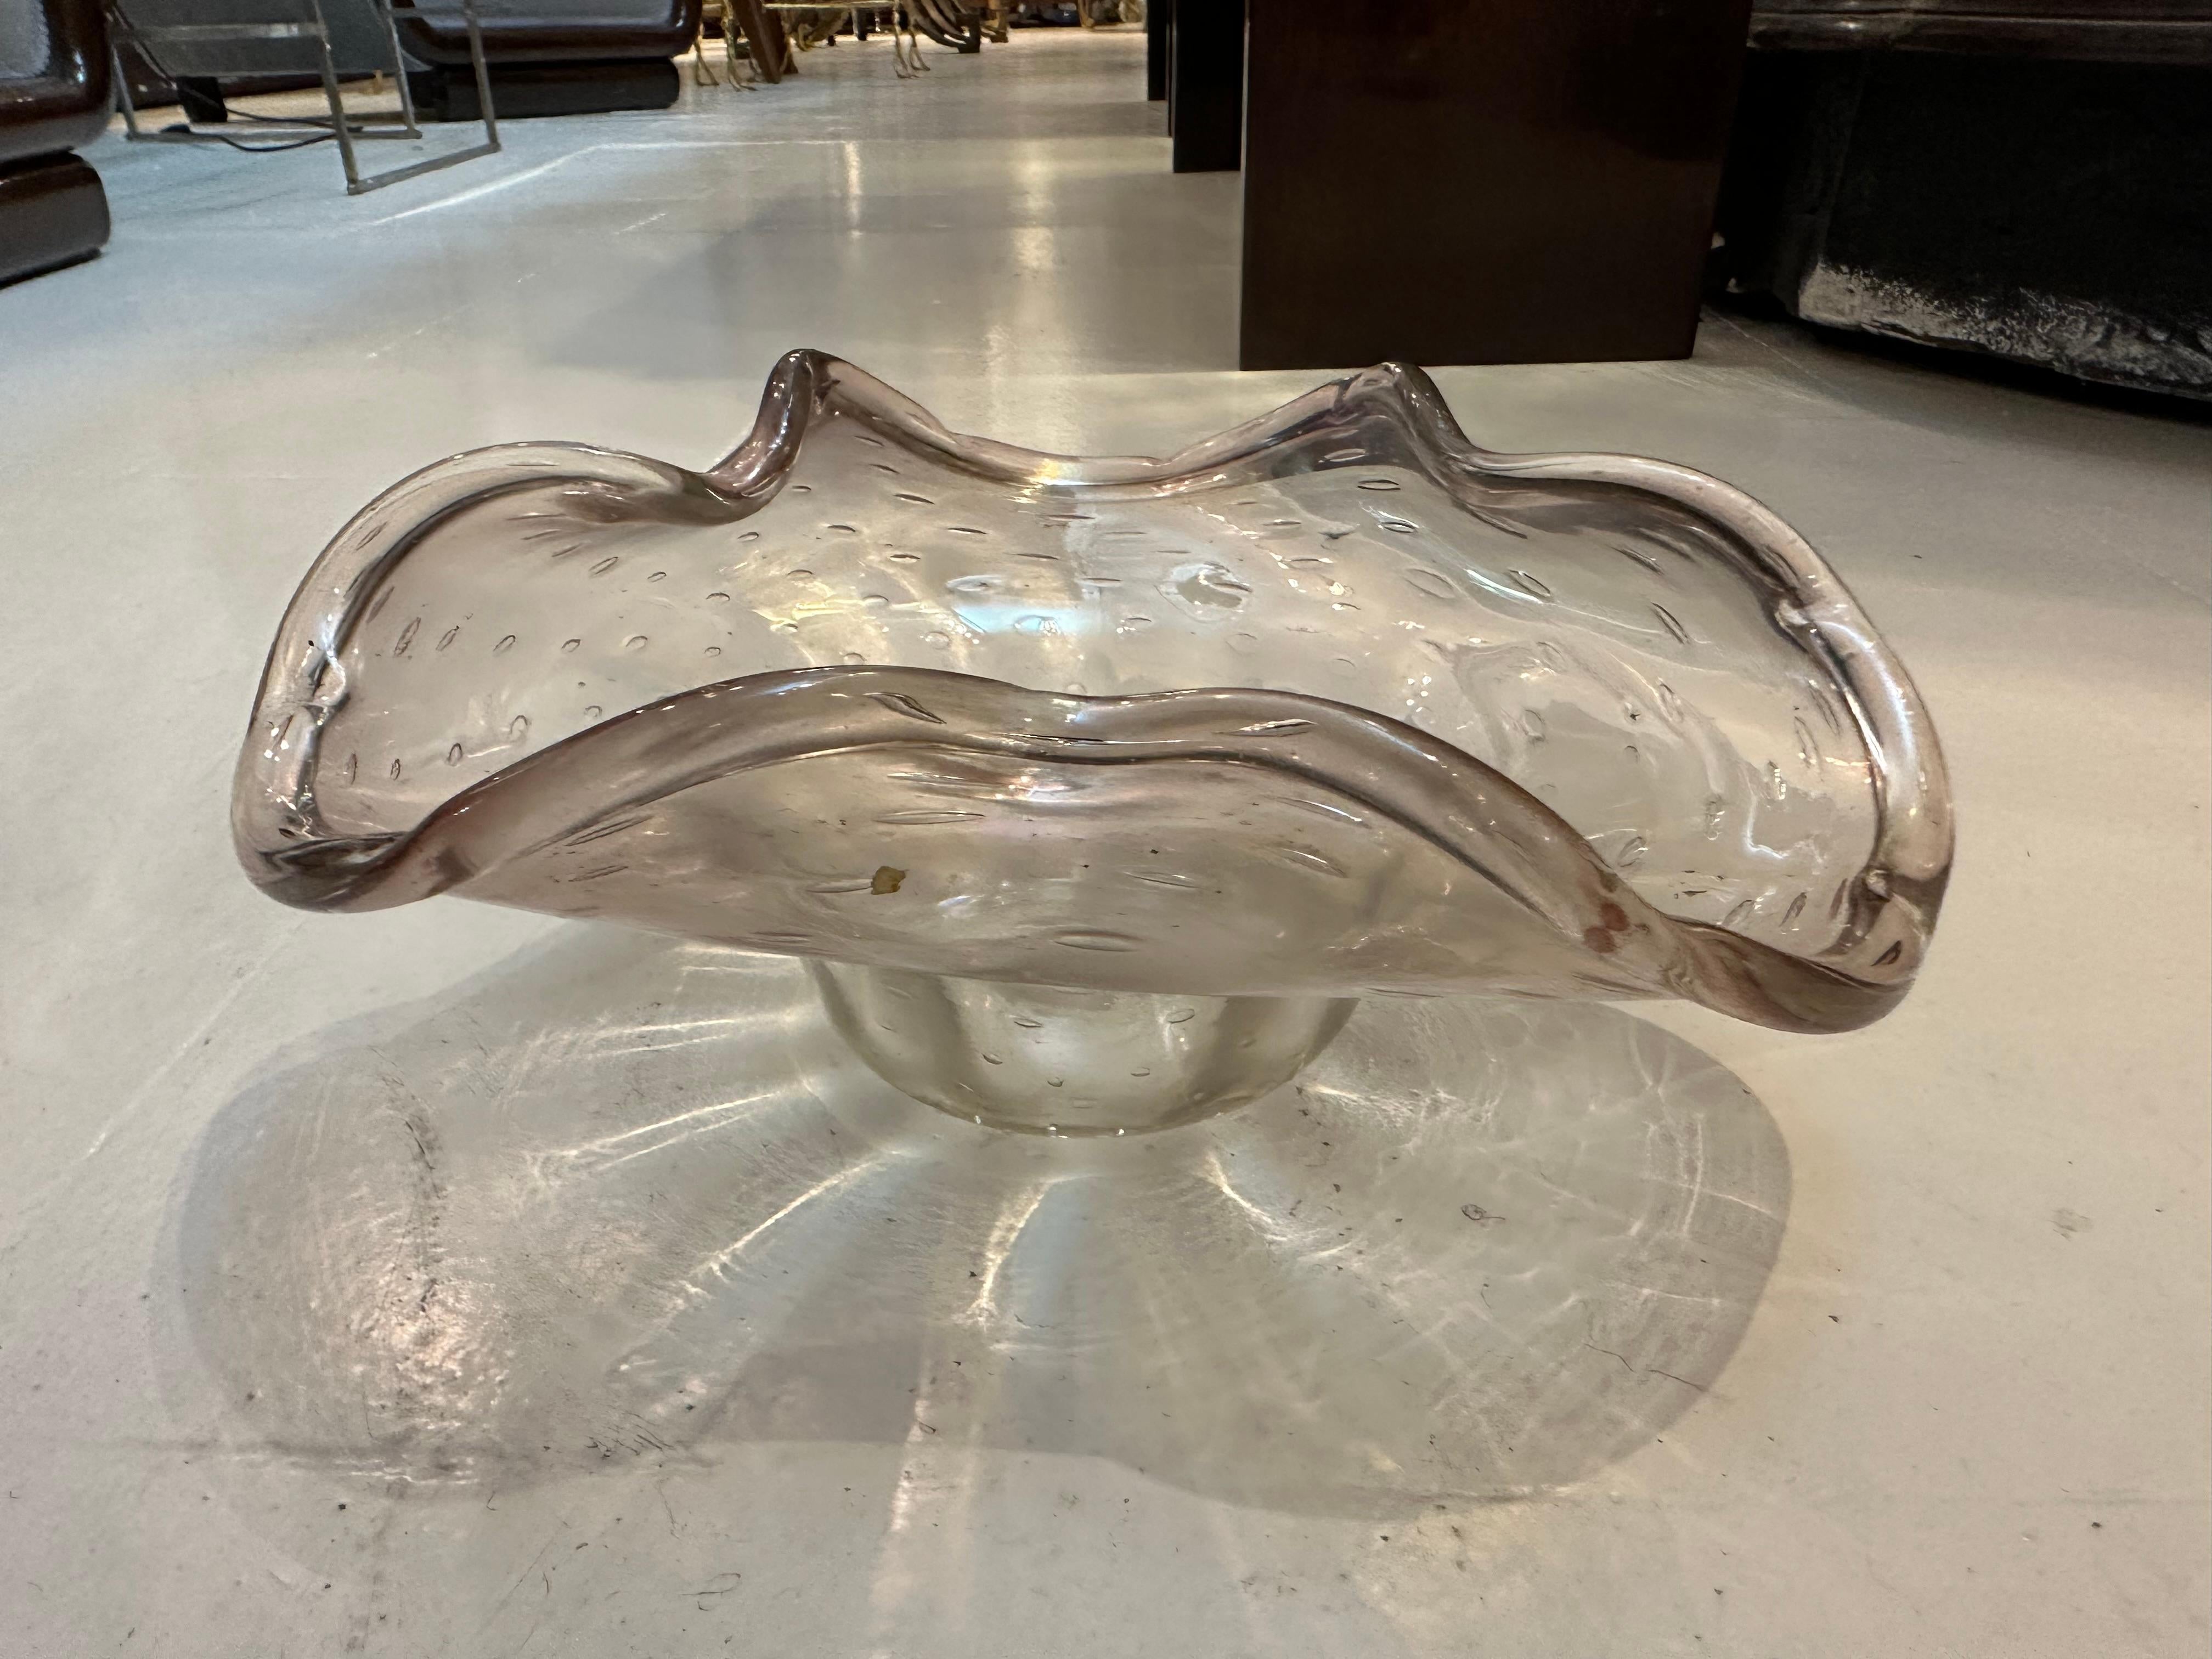 Murano
Technical Bullicante 
Attributed to Carlo Scarpa
We have specialized in the sale of Art Deco and Art Nouveau and Vintage styles since 1982. If you have any questions we are at your disposal. 
Carlo Scarpa (2 June 1906 – 28 November 1978) was